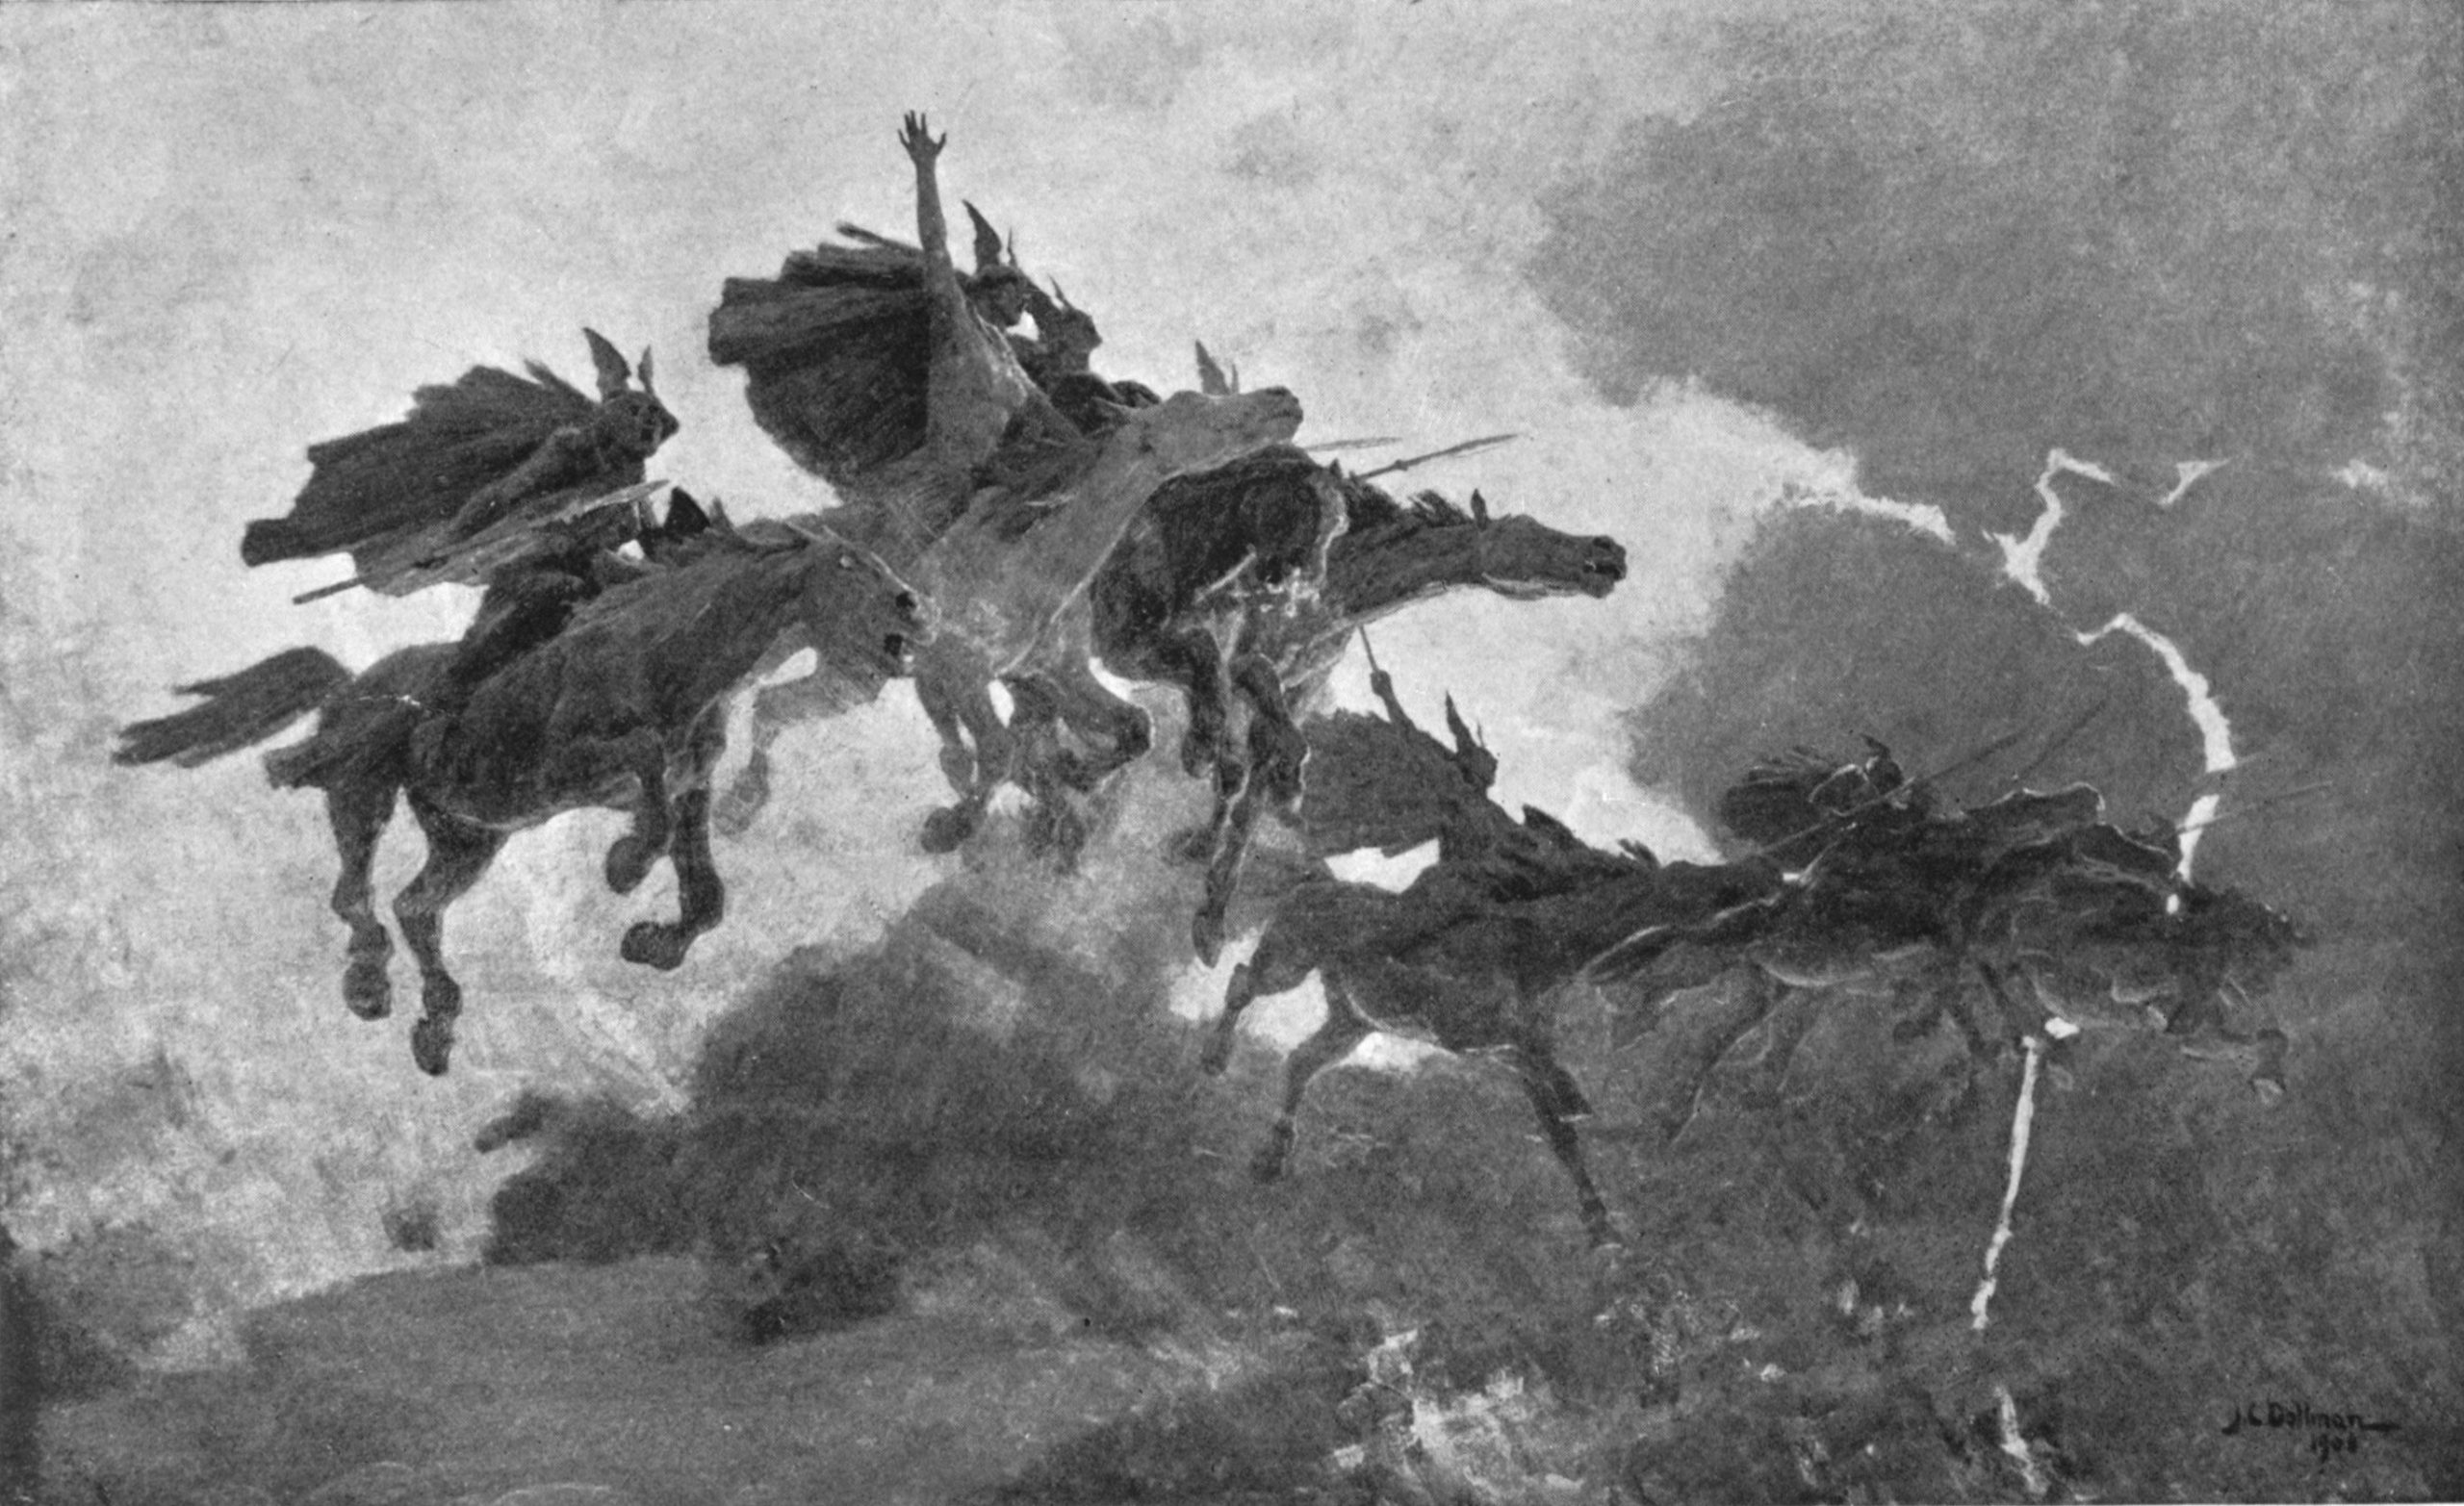 Female warriors riding on horses flying through the clouds